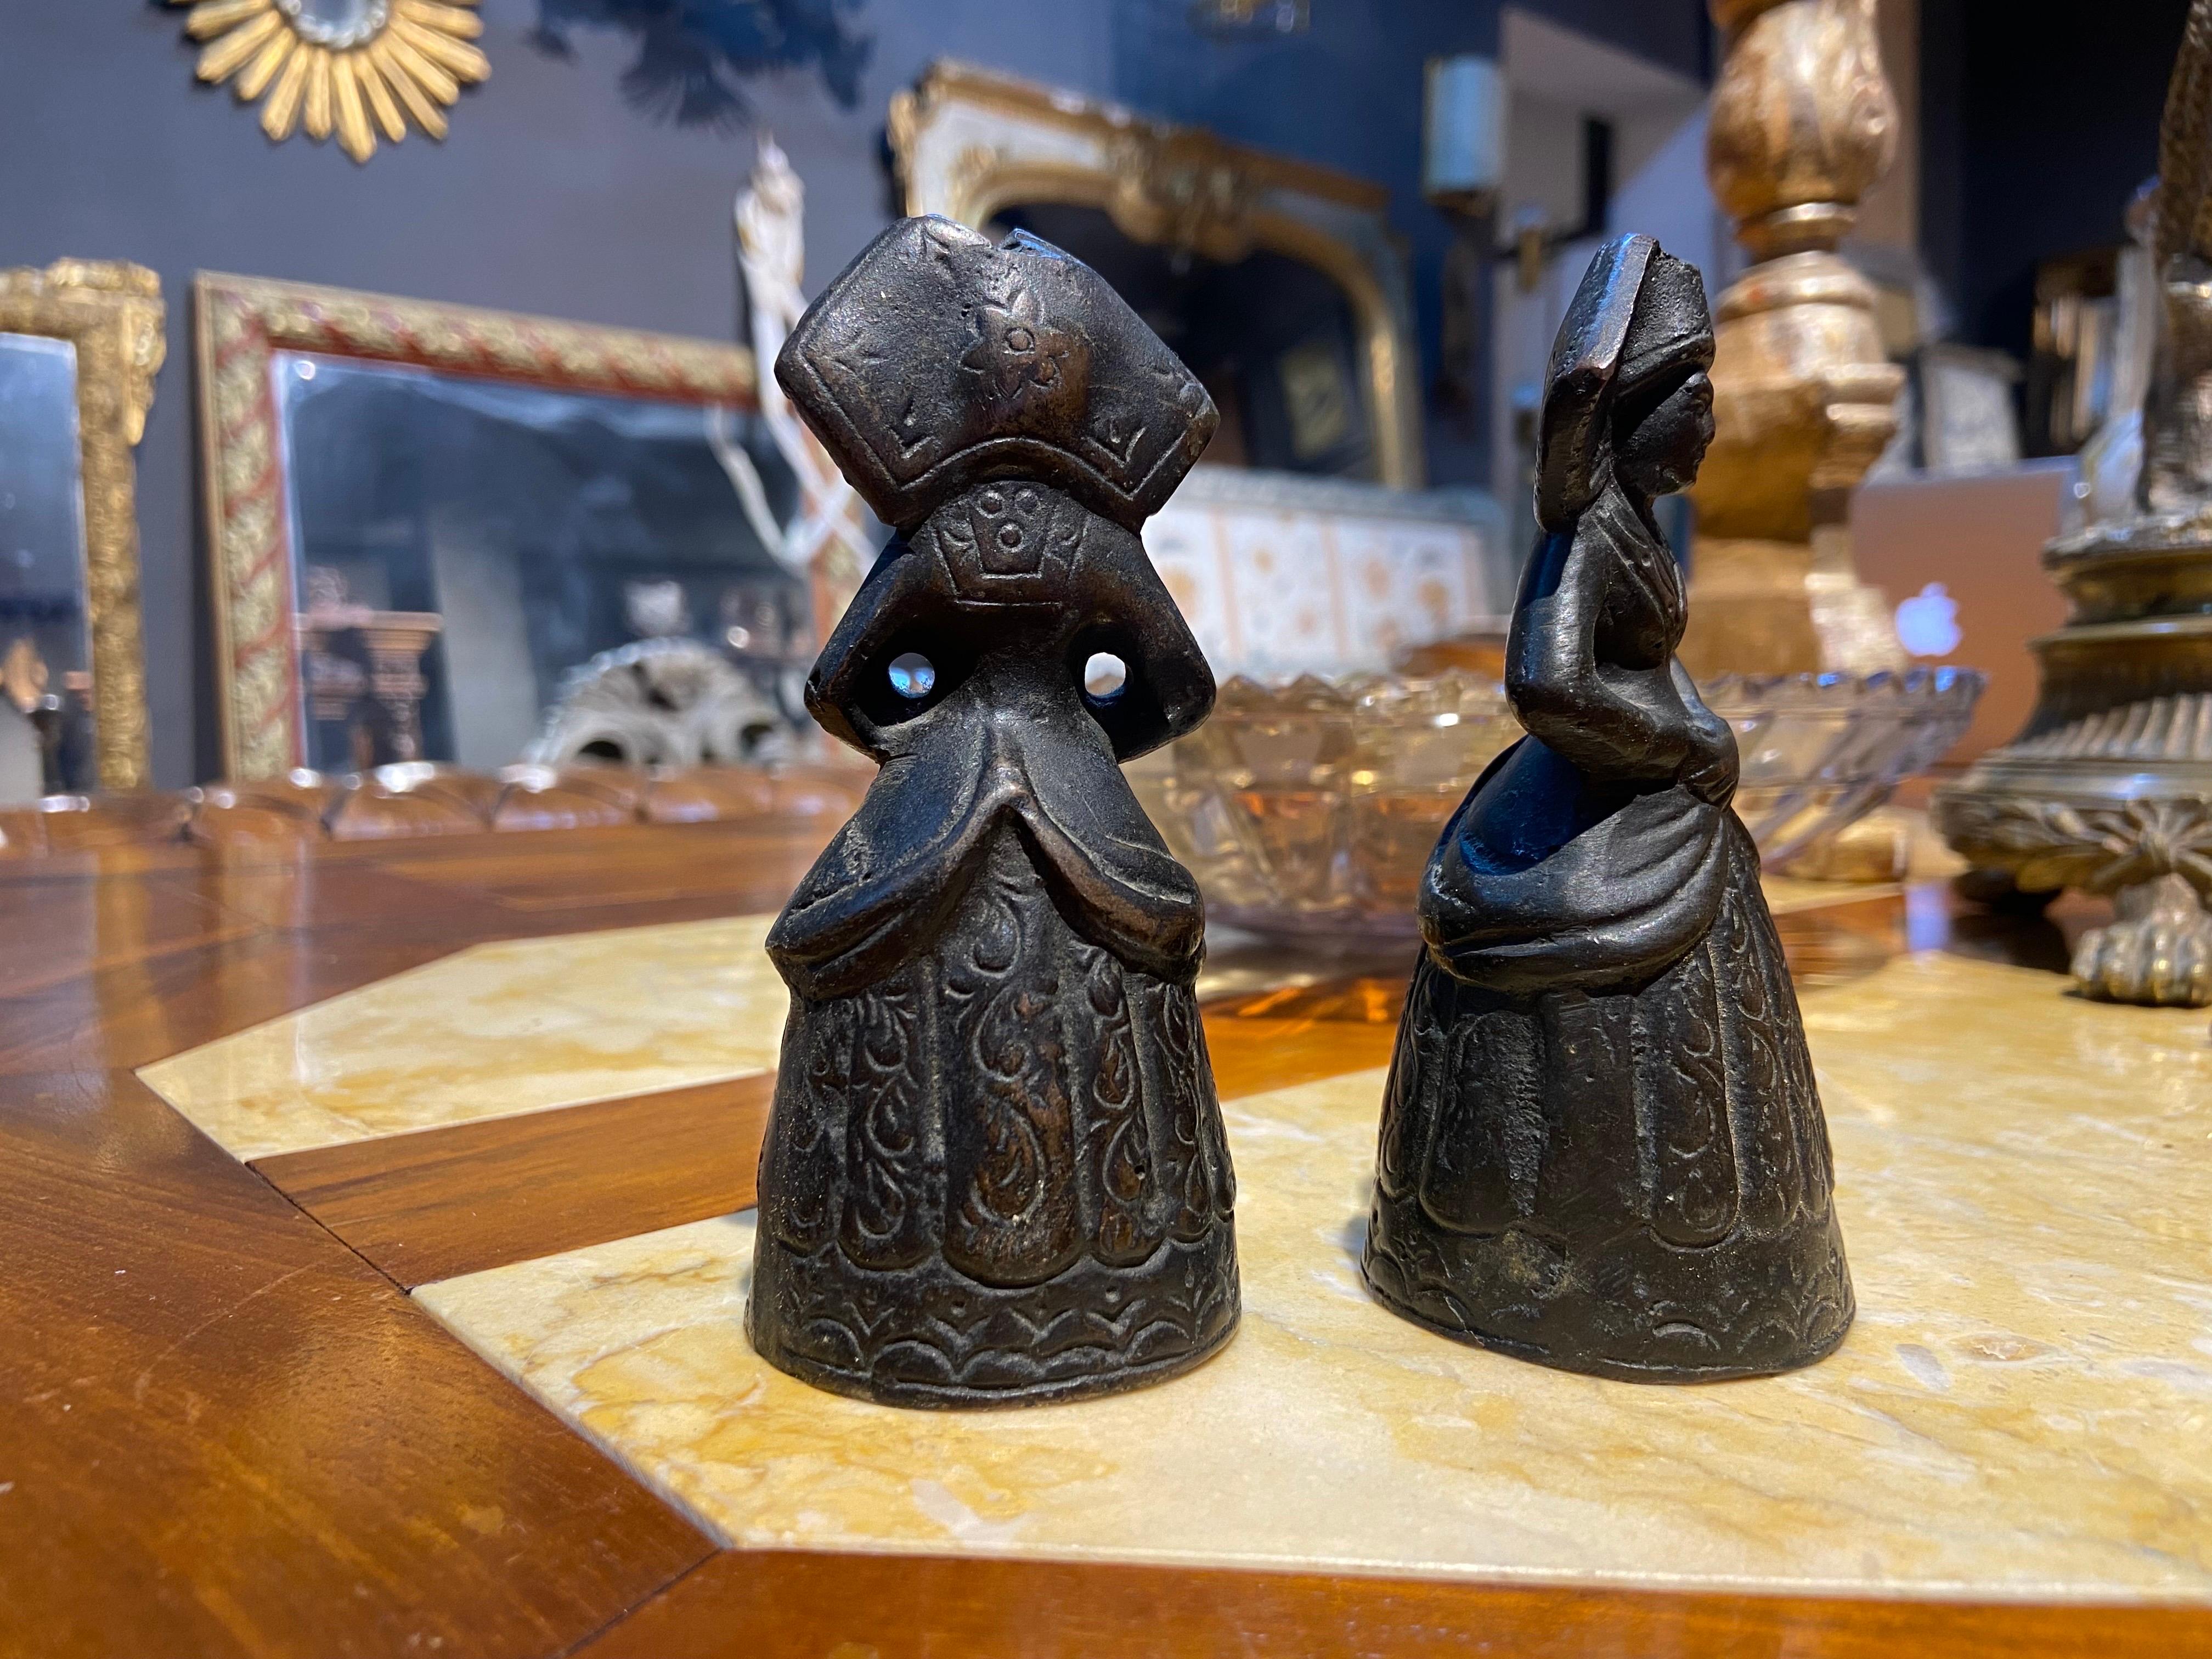 Here we present two identical cast iron black figurative servant bells in their authentic condition made in France in the late 19th century.
Great accent for your desk or your table and a lovely gift as well.
France, circa 1890.